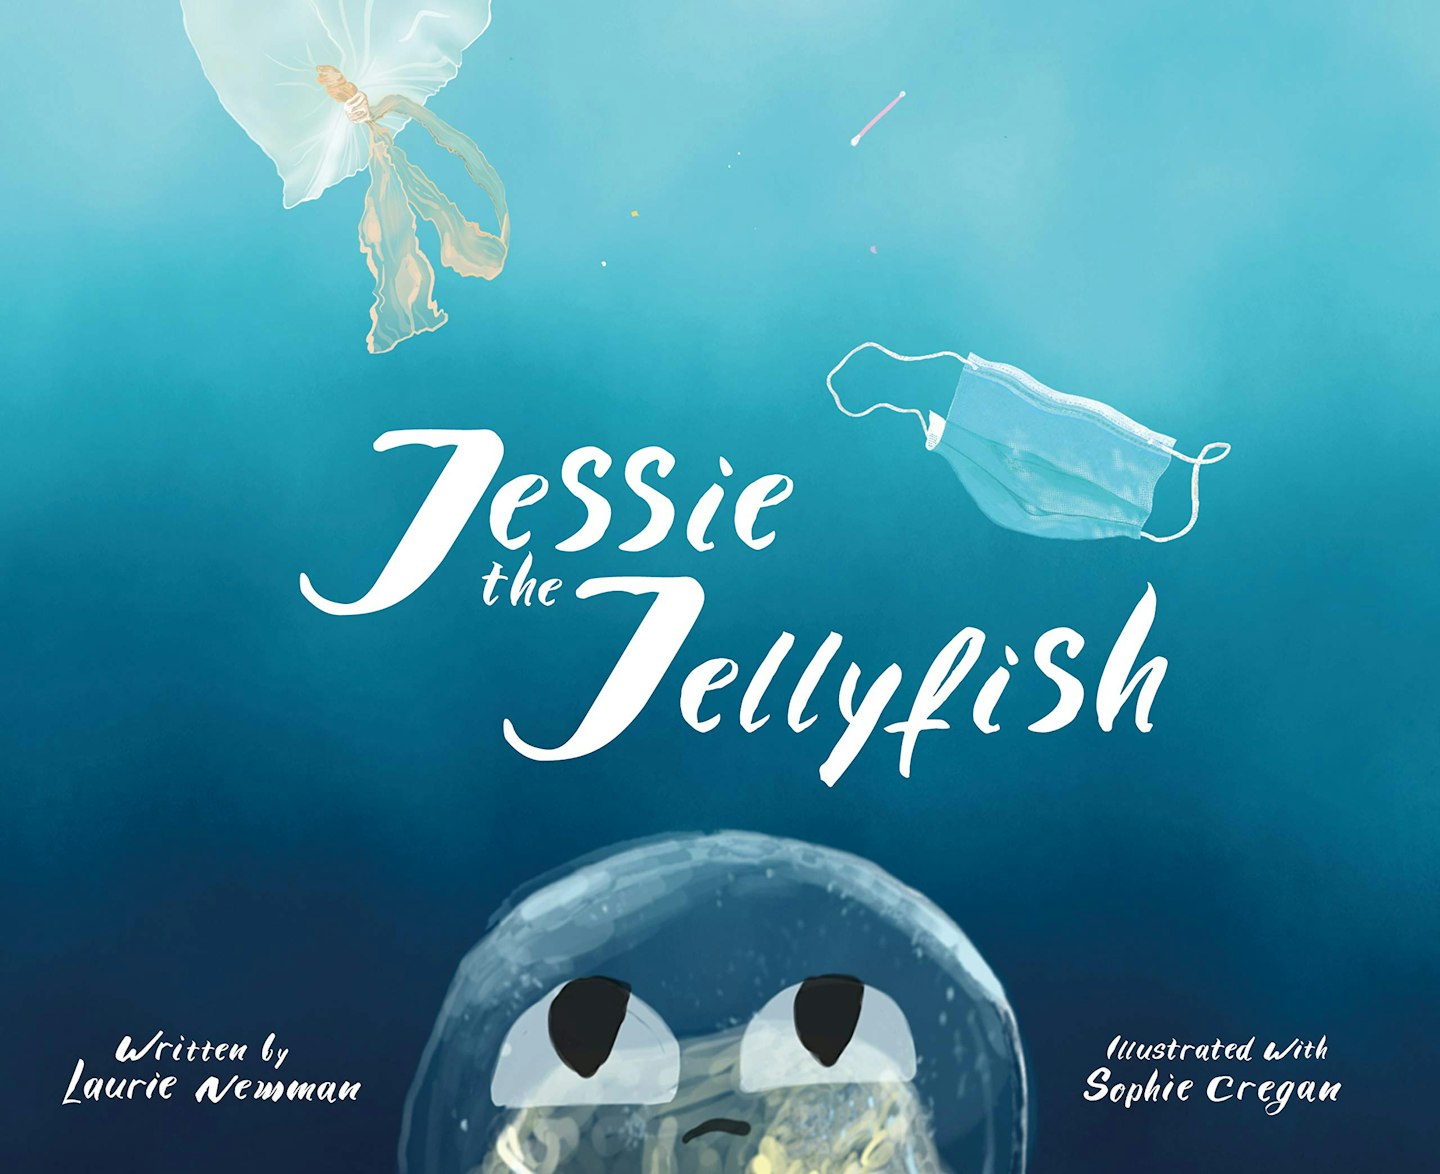 Jessie The Jellyfish by Laurie Newman & Sophie Cregan (Illustrator)